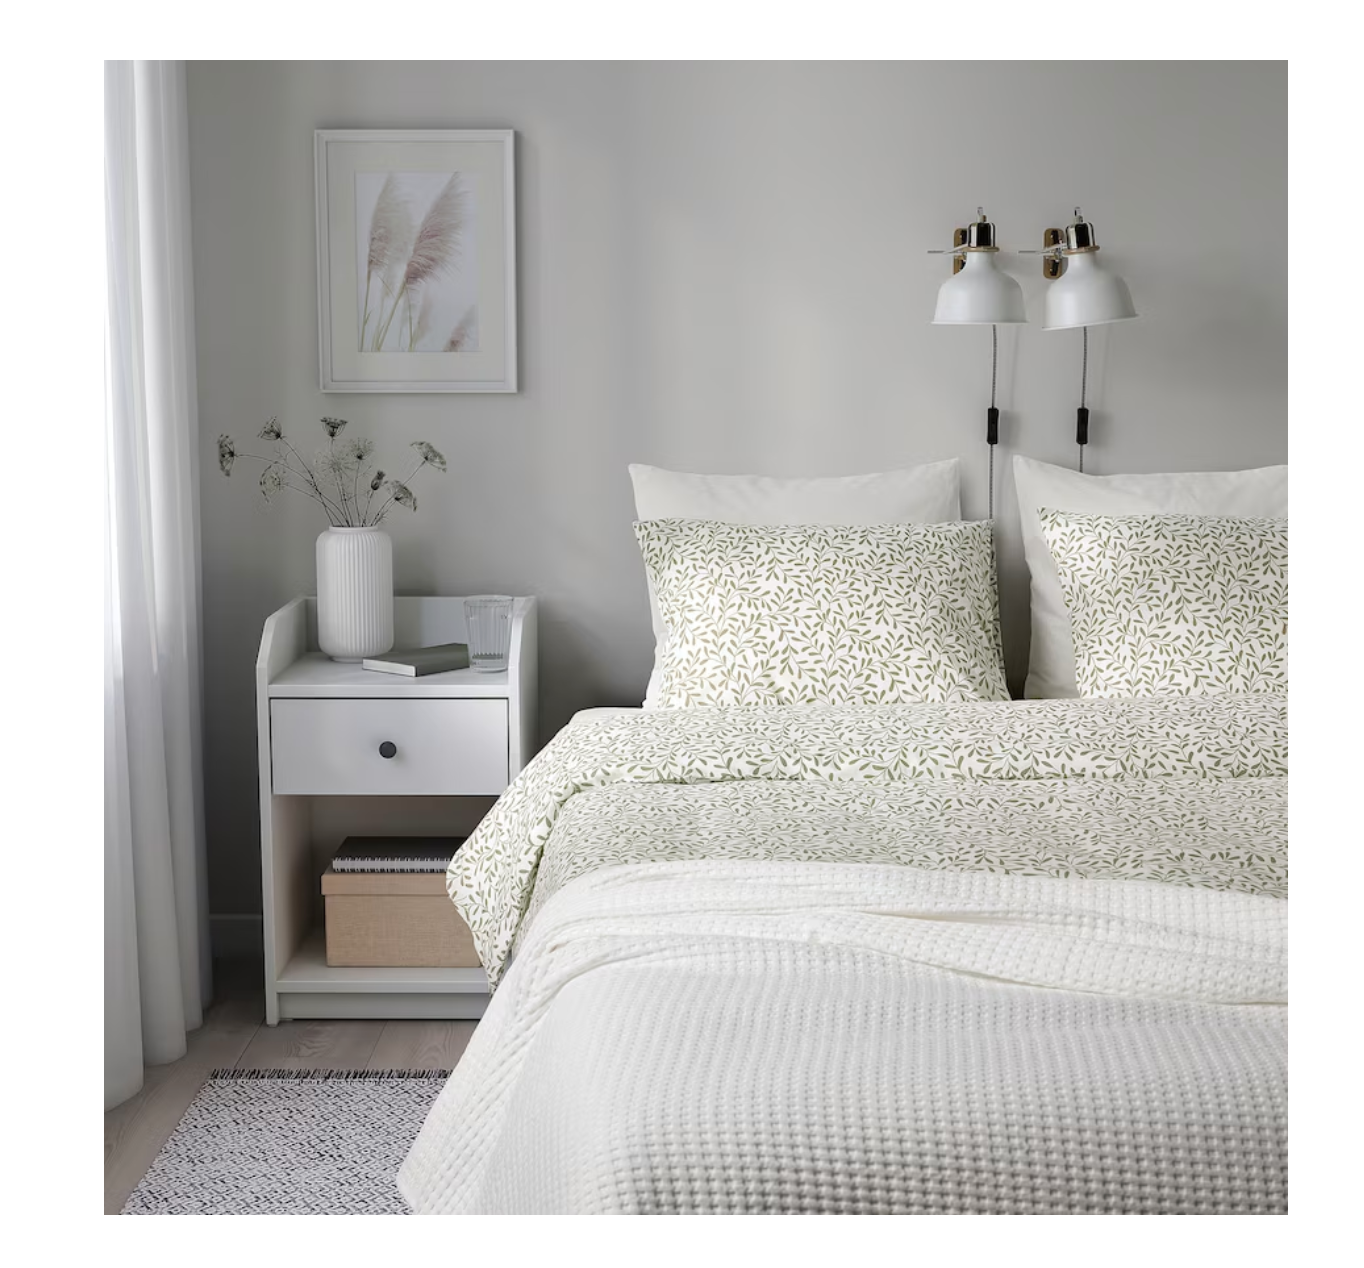 Bedroom White Gray Decorated Pillows Blanket